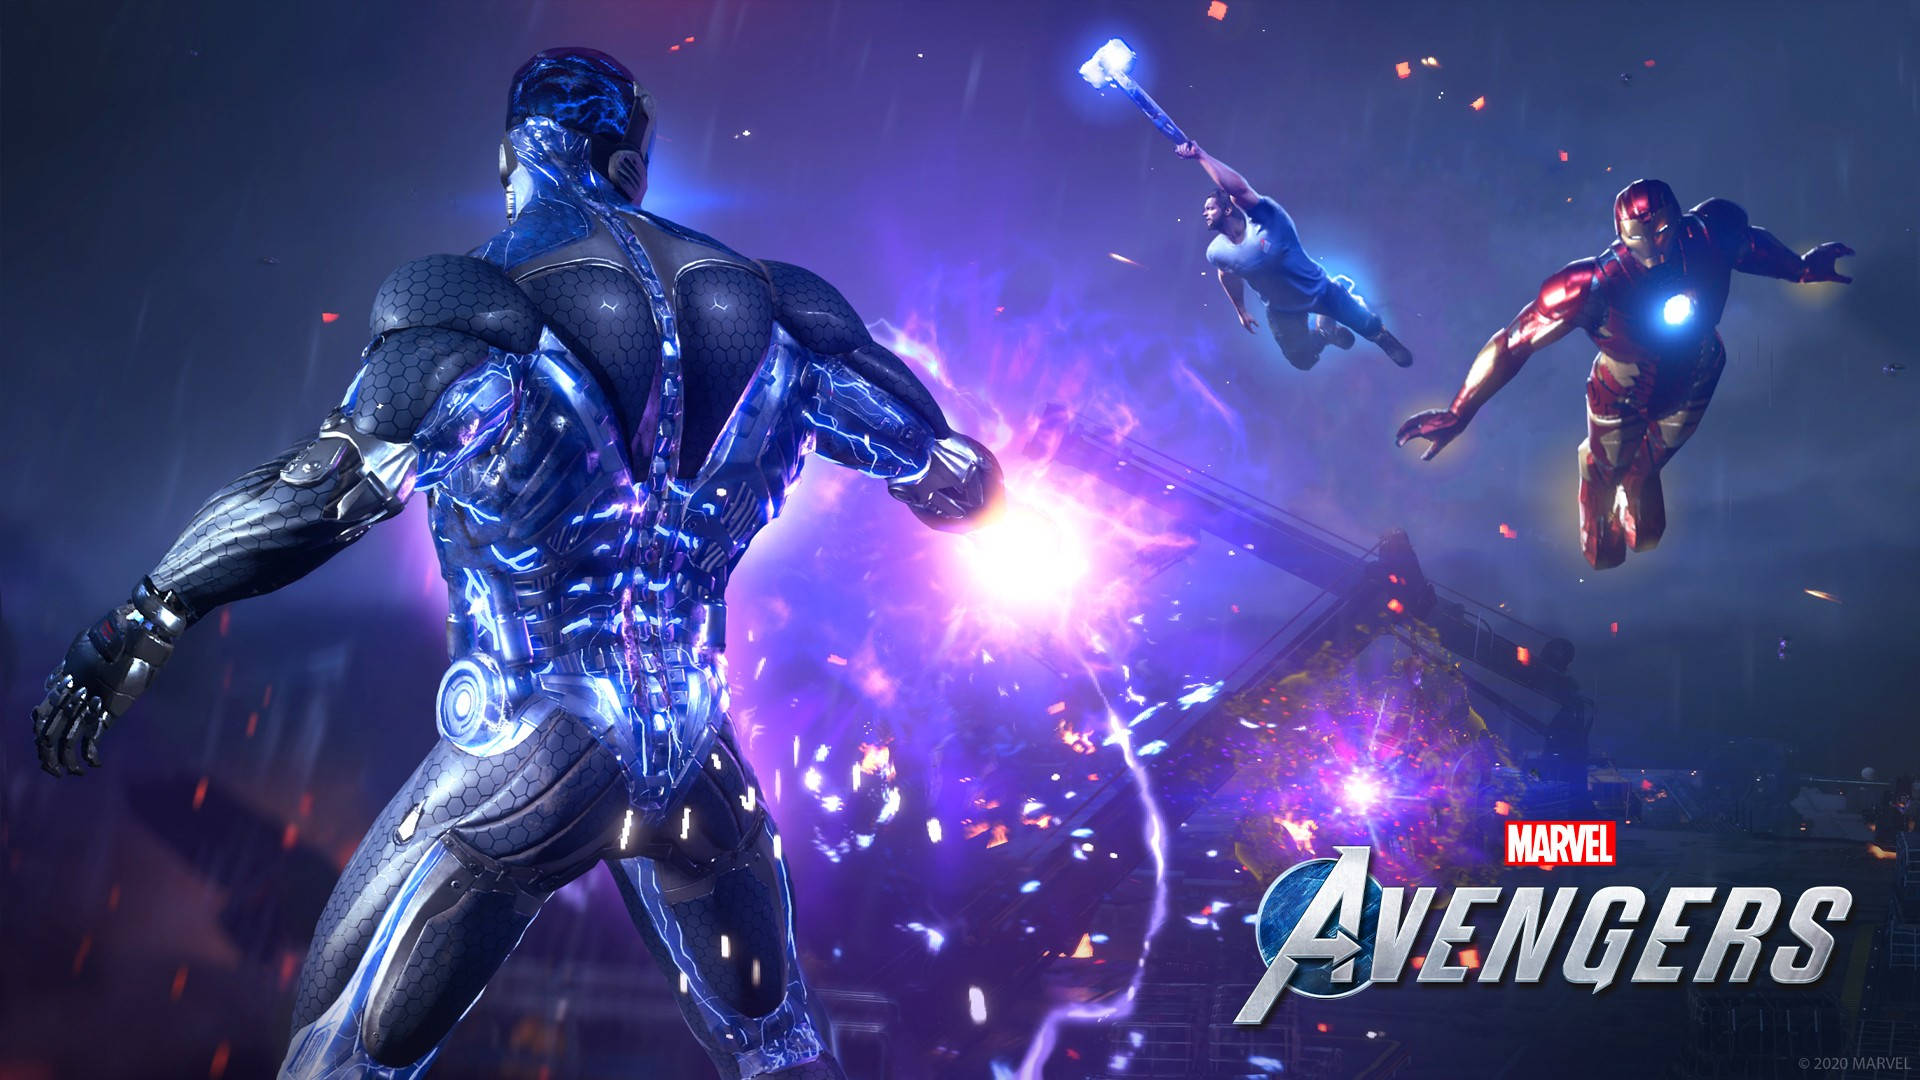 Get ready to play with Marvel Super Heroes and unlock the power of the Xbox. Wallpaper